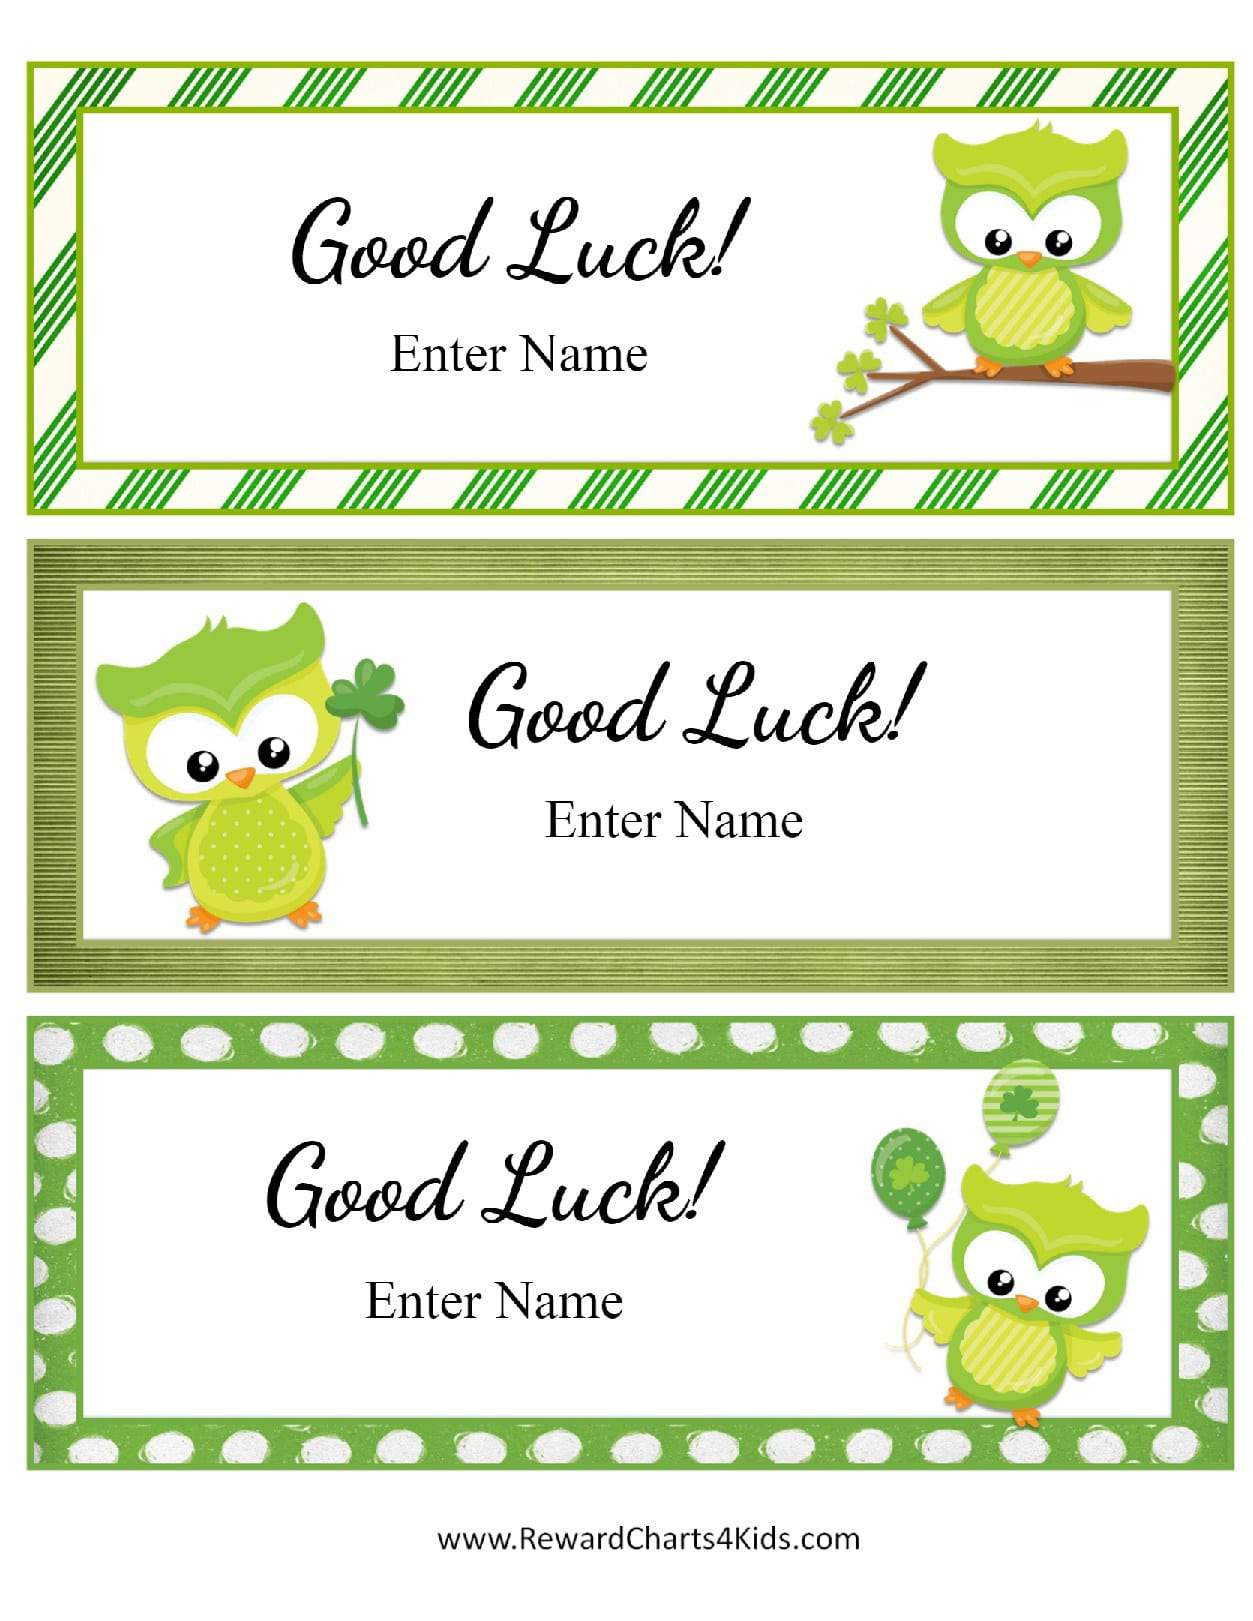 Free Good Luck Cards For Kids | Customize Online &amp;amp; Print At Home - Free Printable Good Luck Cards